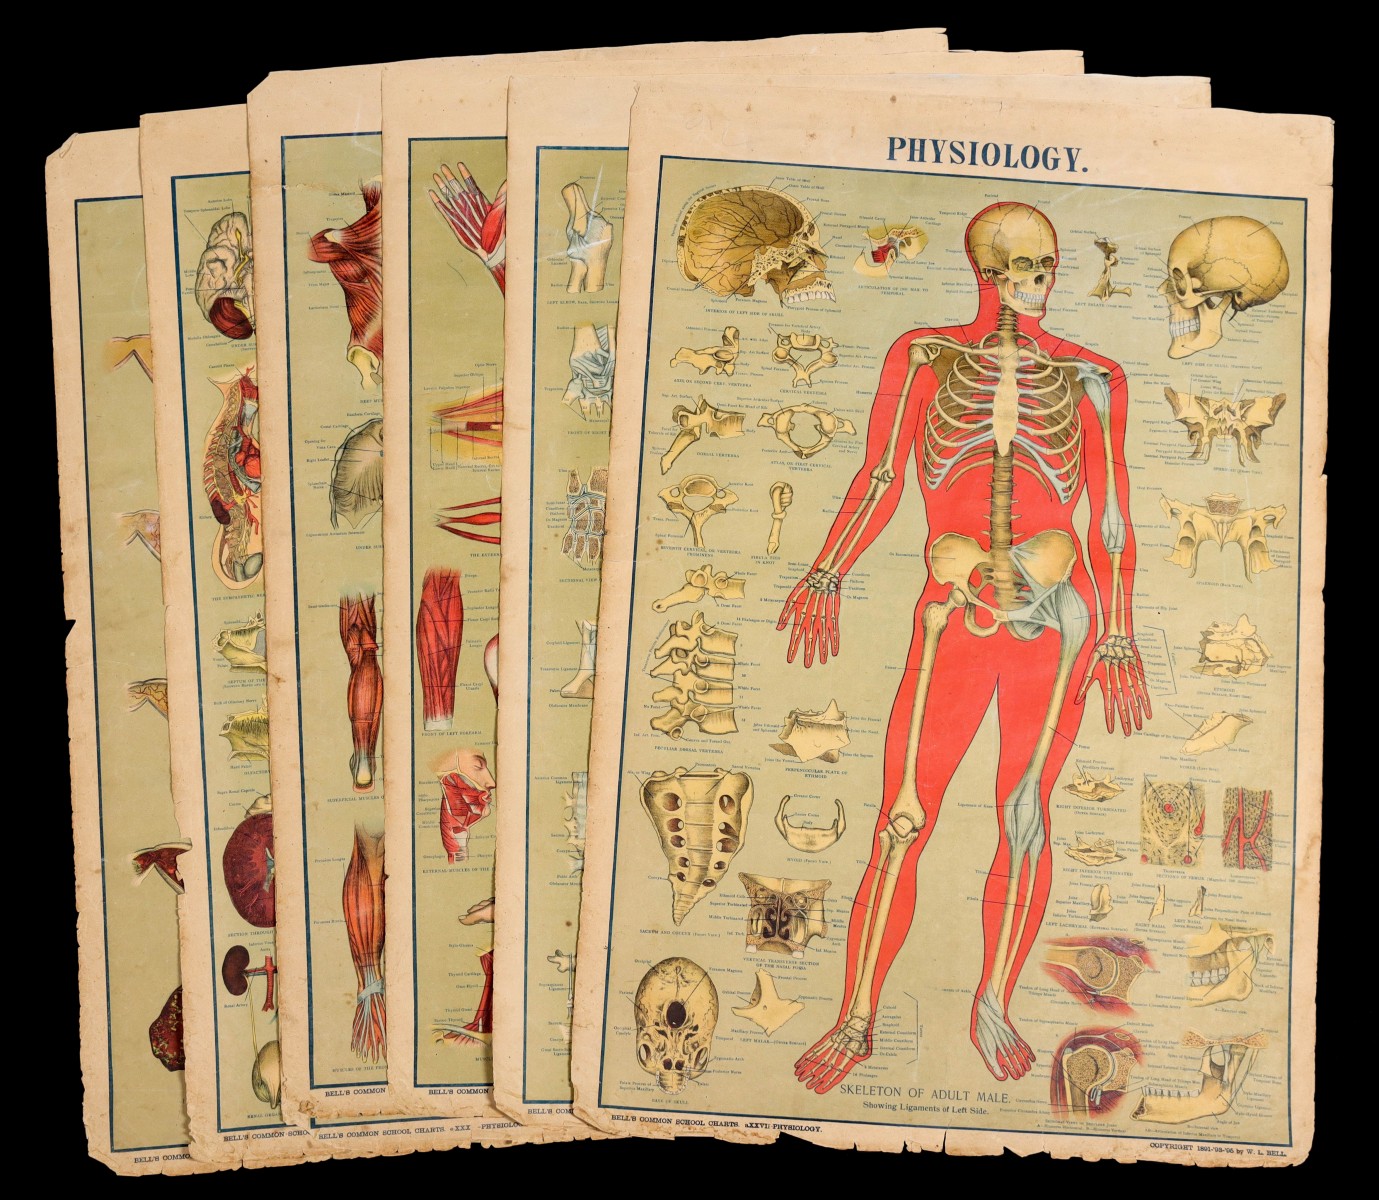 BELL'S COMMON SCHOOL CHARTS: PHYSIOLOGY CIRCA 1900